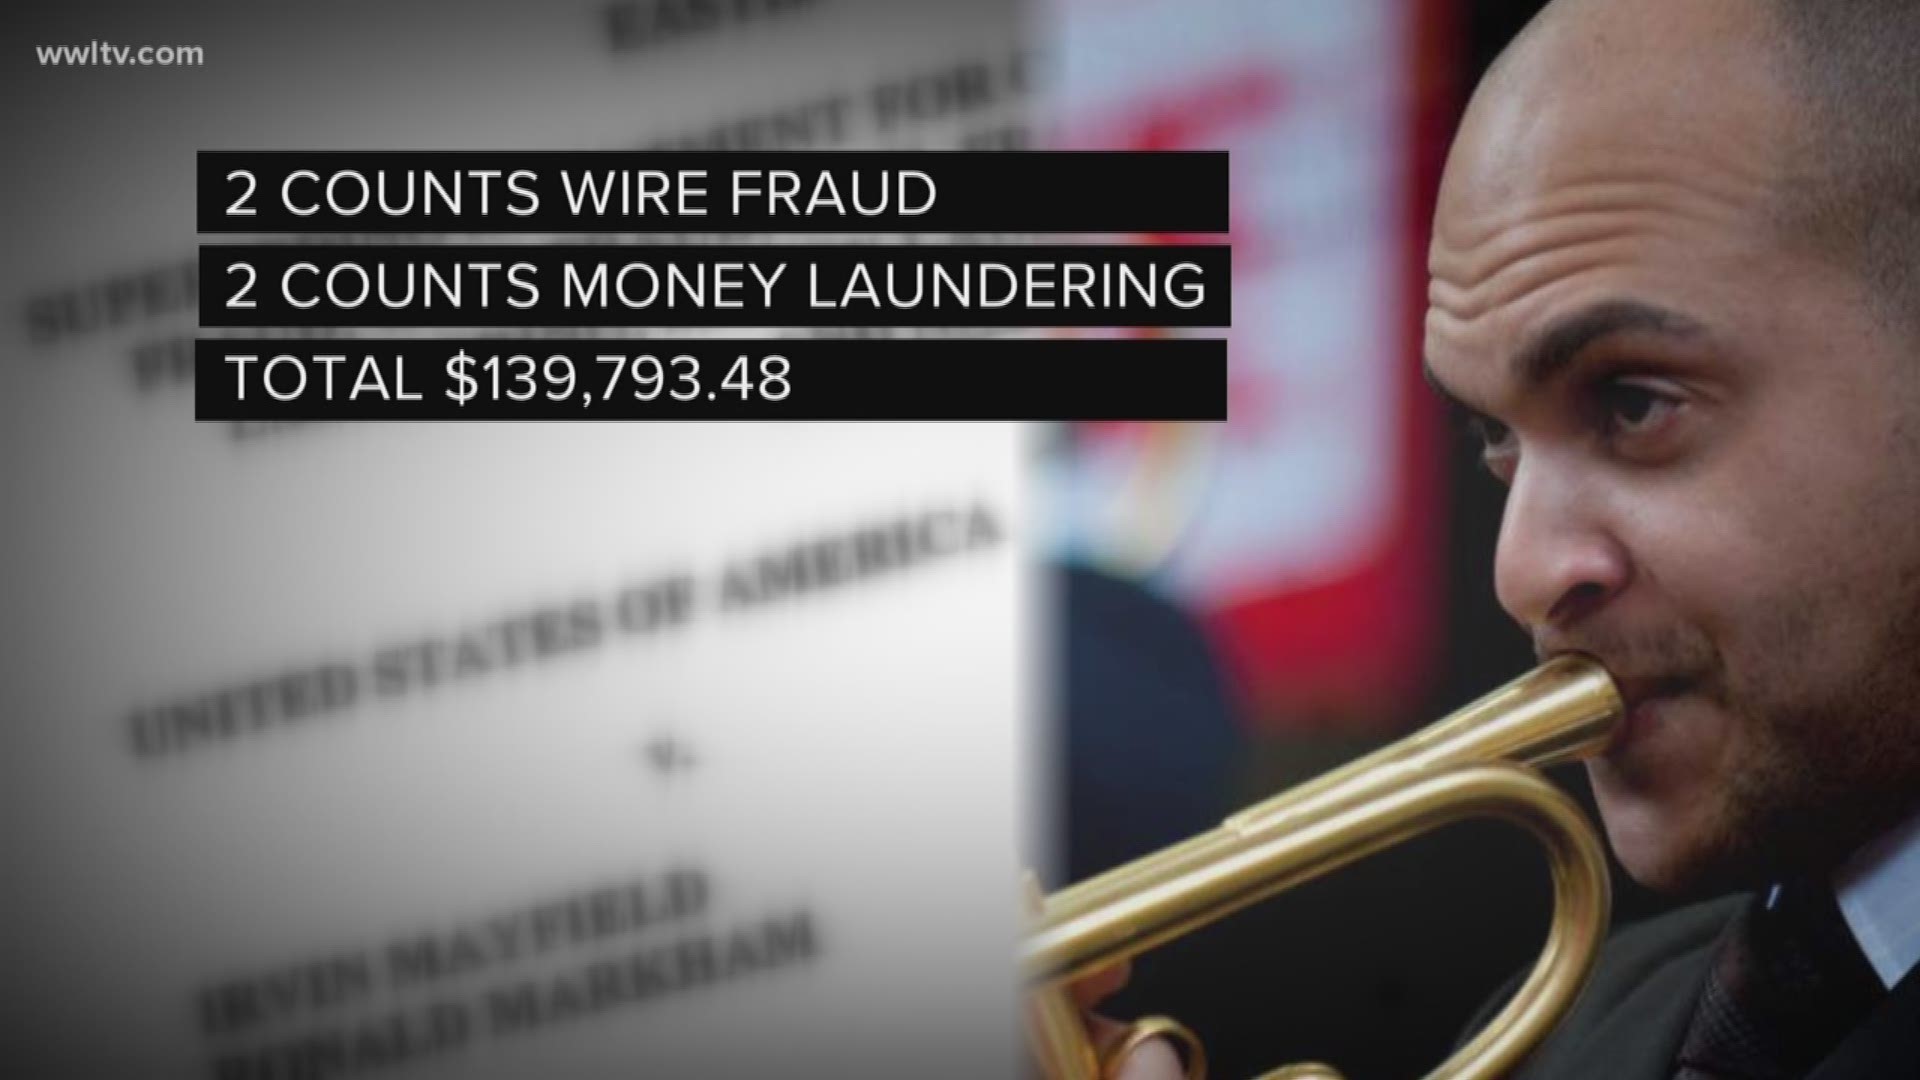 The criminal charges closely mirror the payments first uncovered by WWL-TV in an exclusive 2-year investigation in 2015 and 2016.